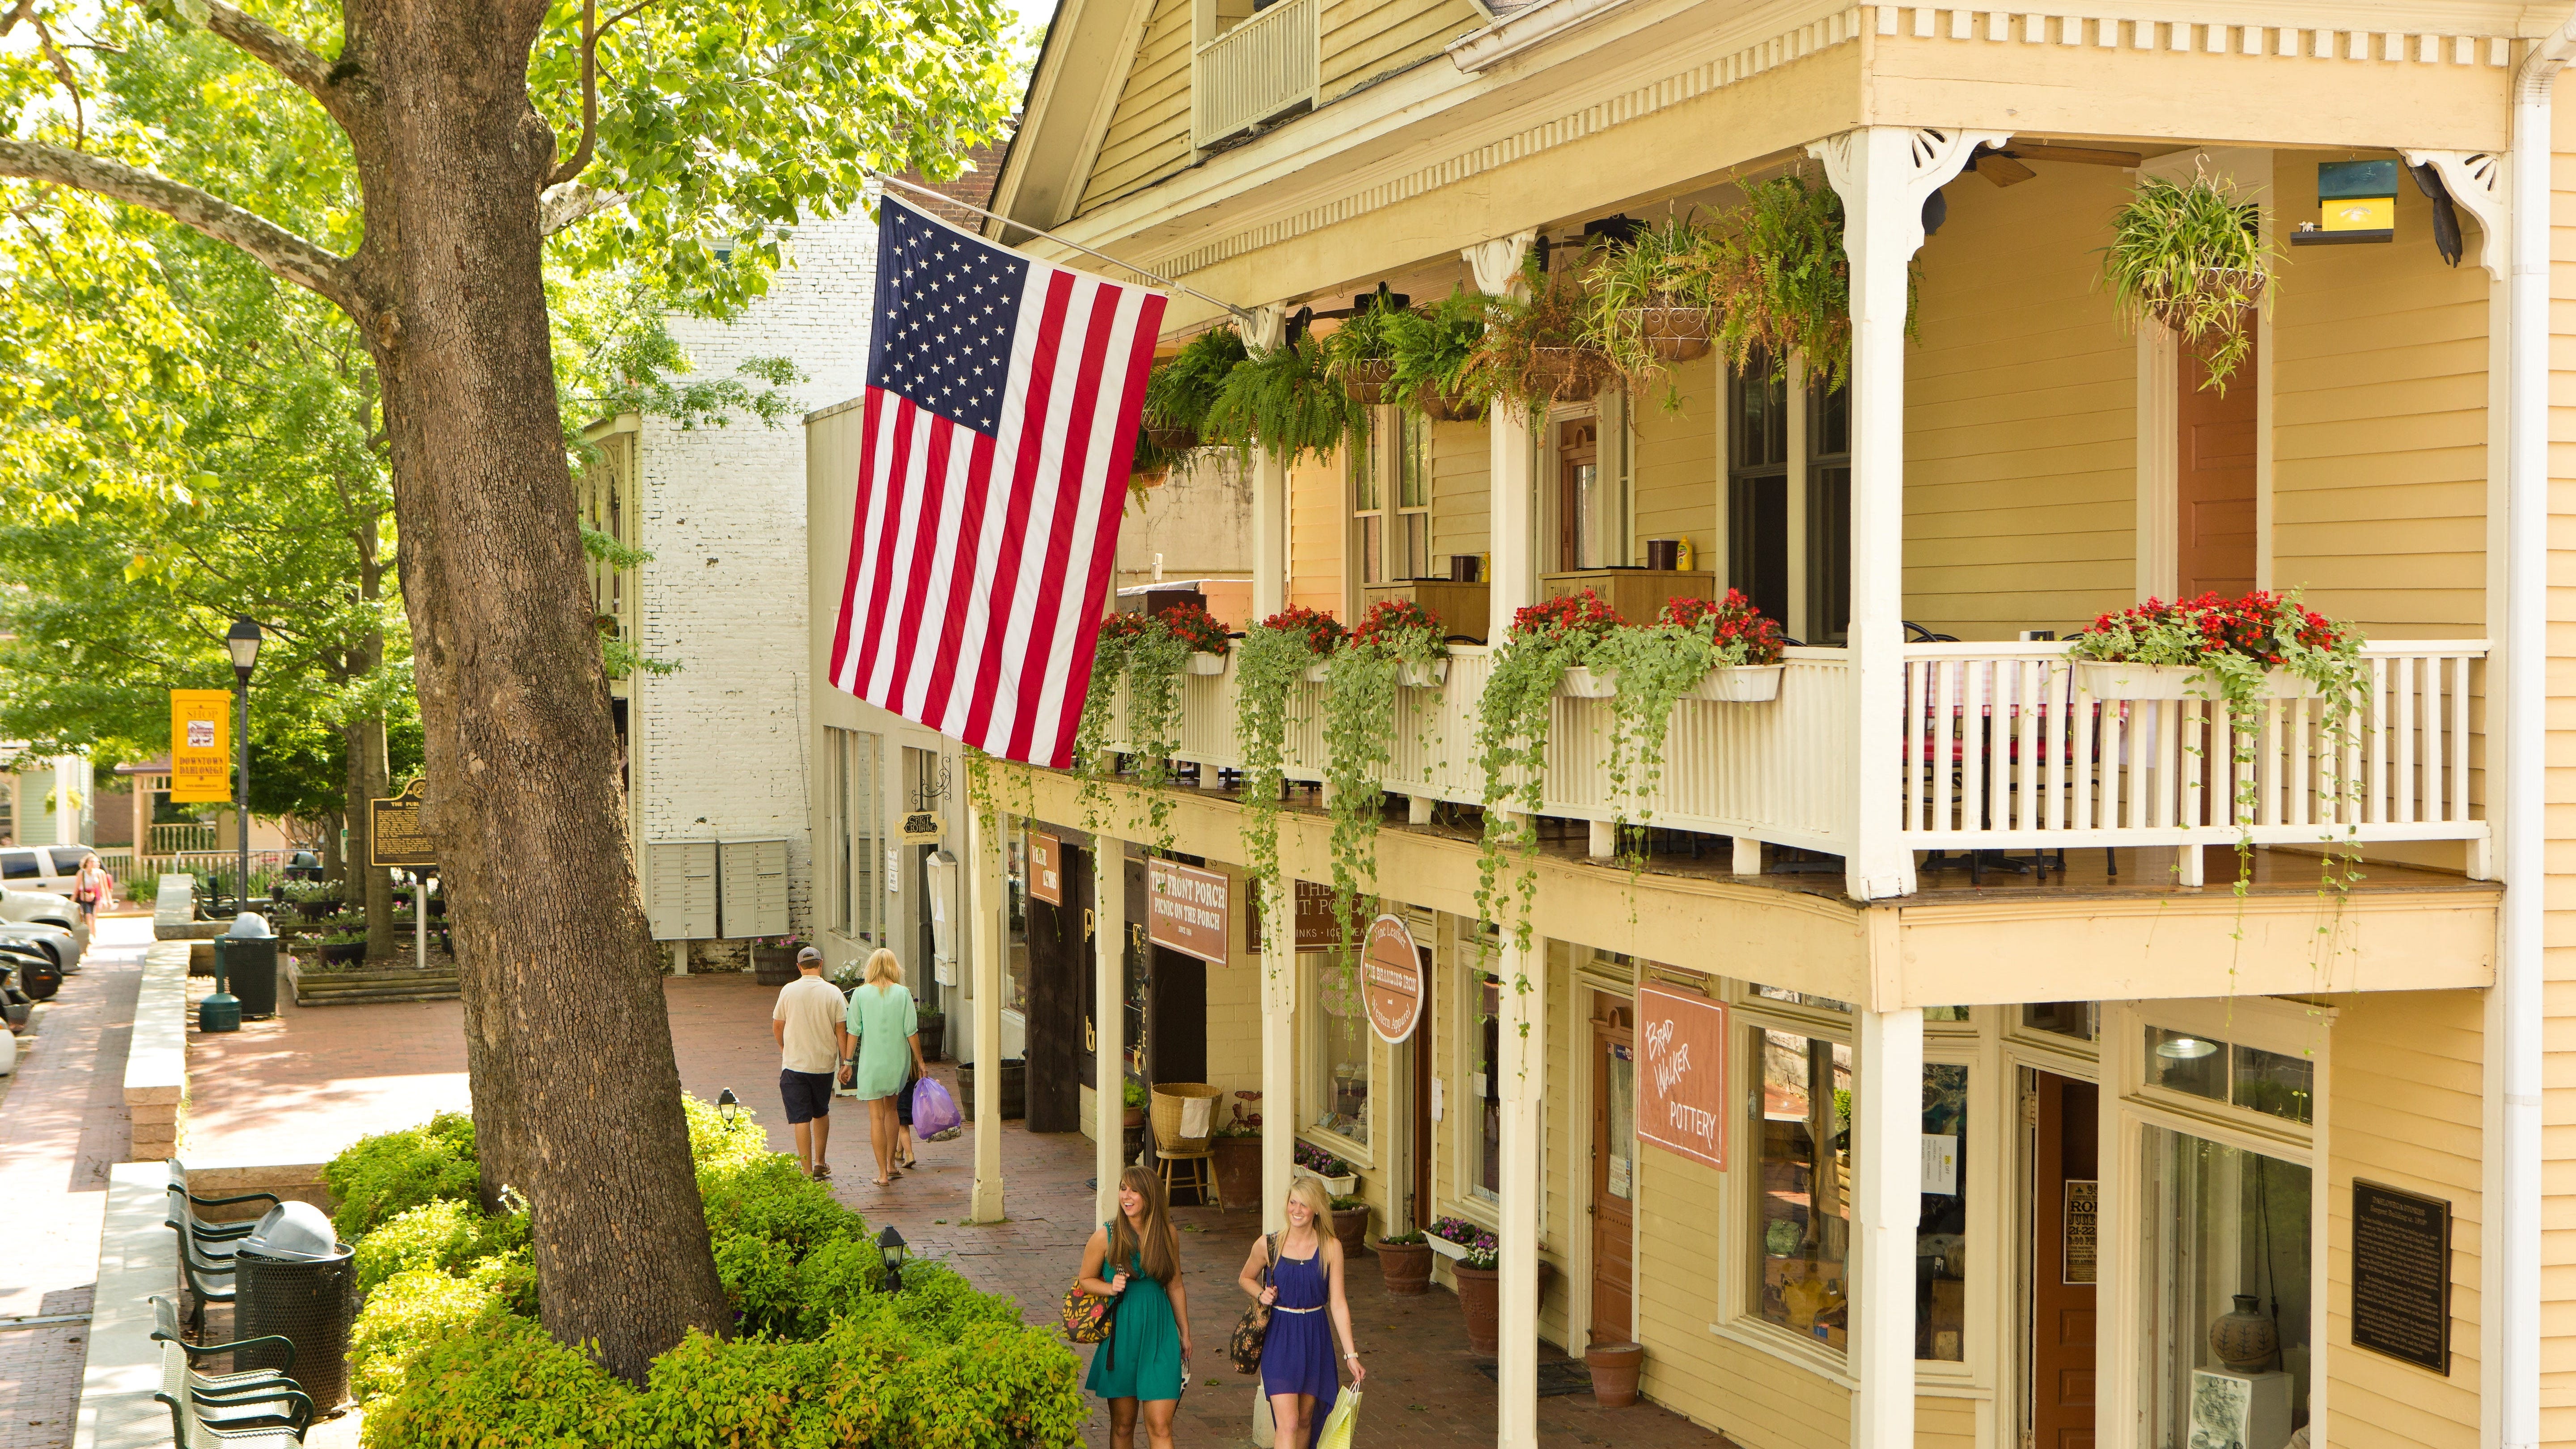 The Dahlonega square features plenty of shopping and dining